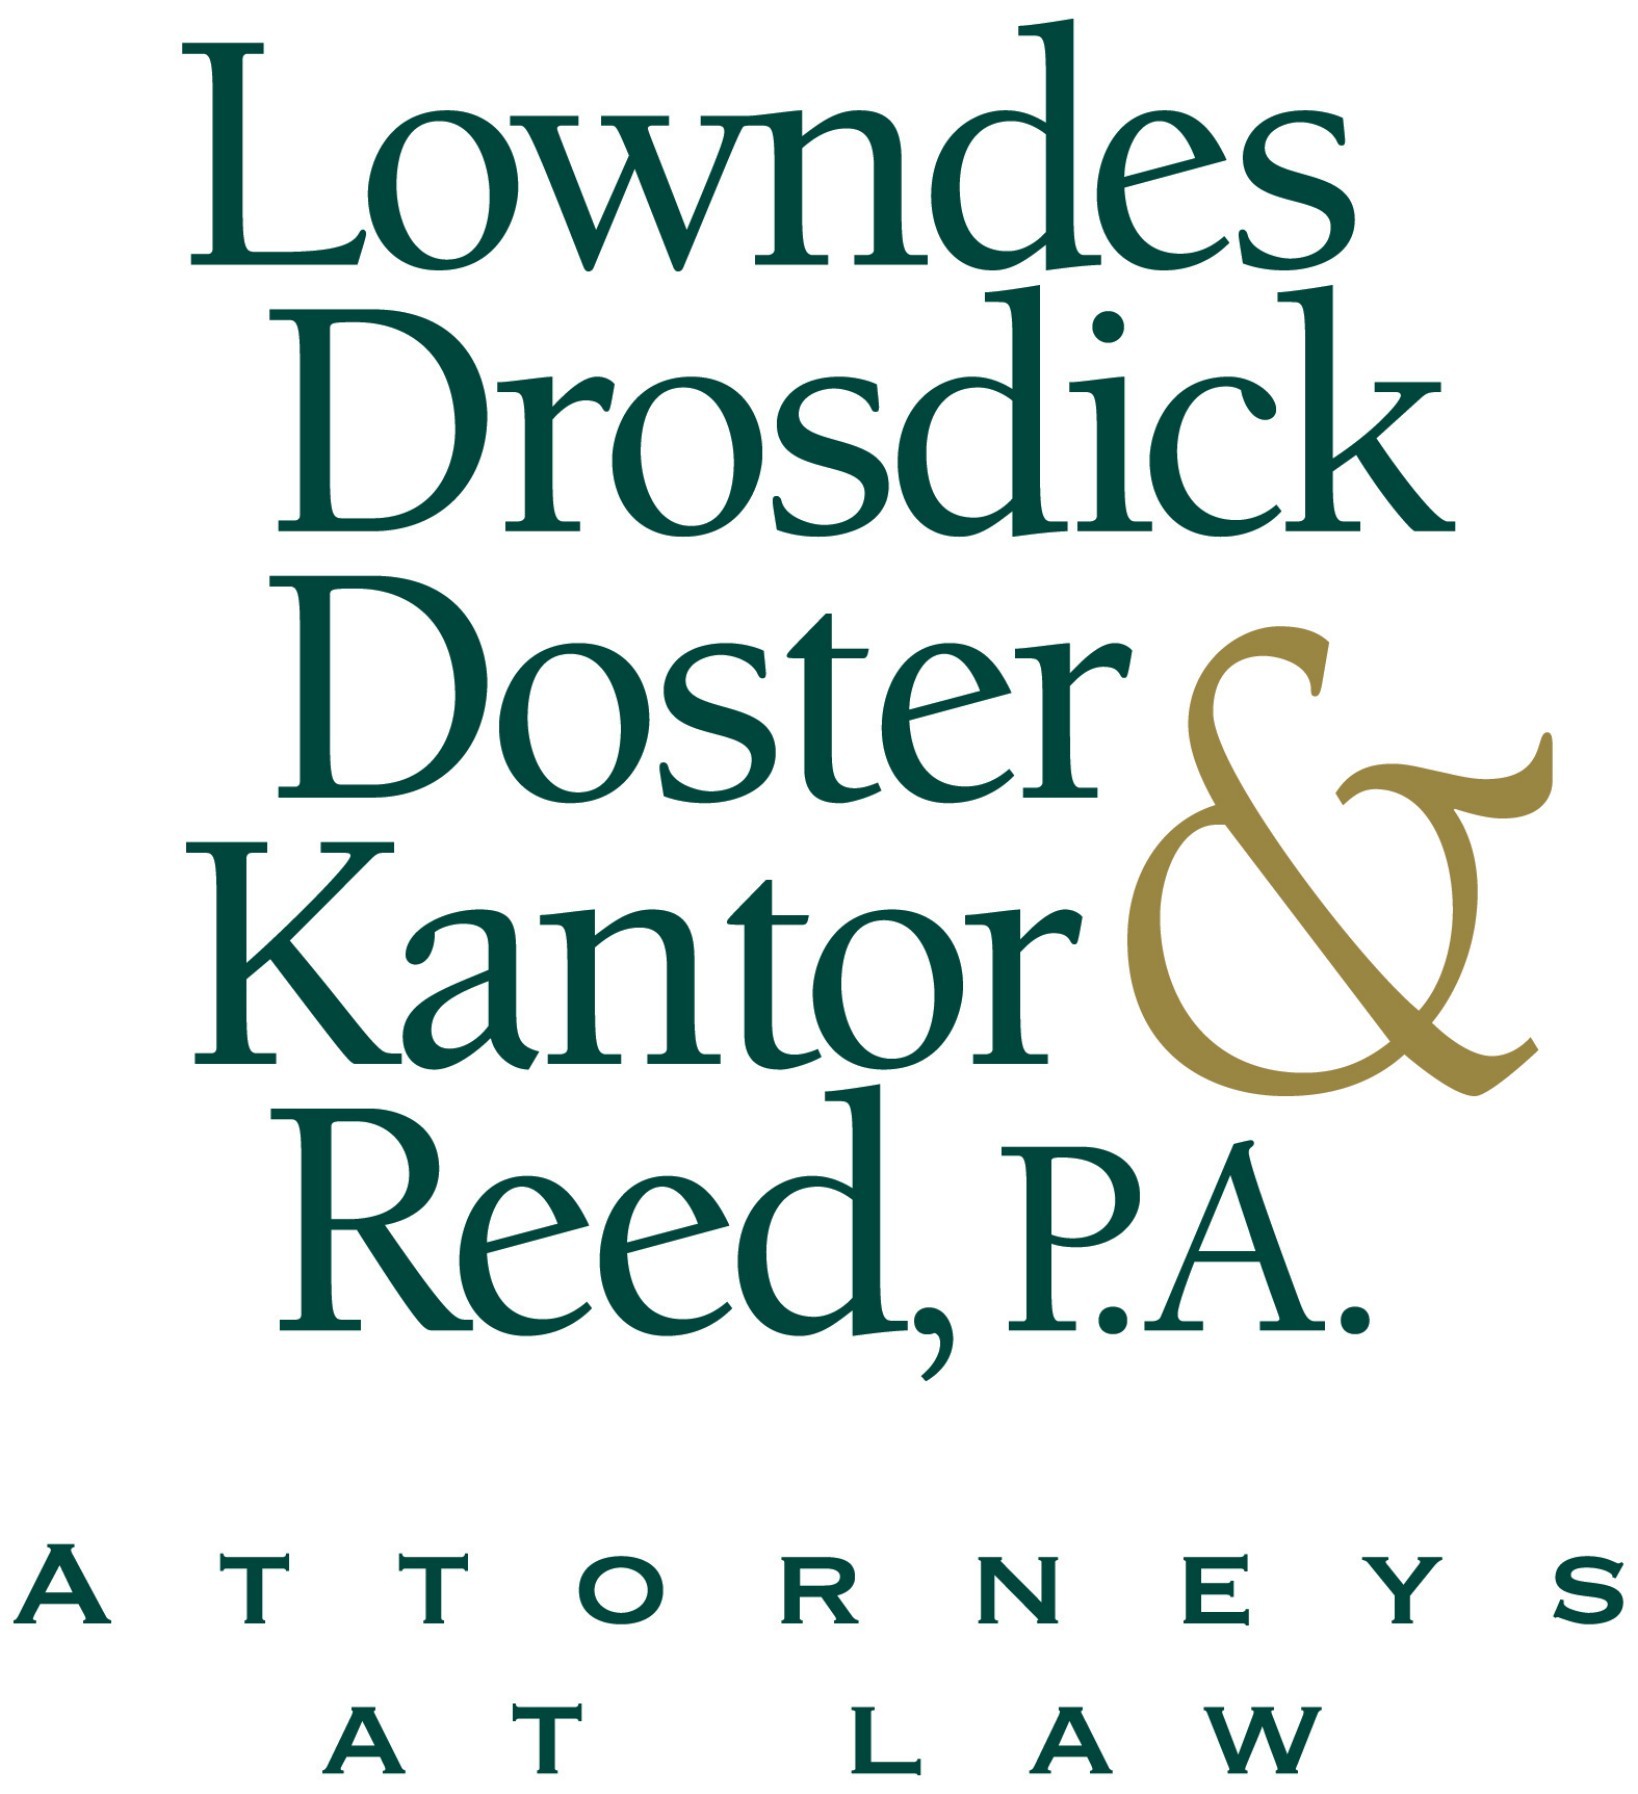 Lowndes, Drosdick, Doster, Kantor and Reed, P.A.